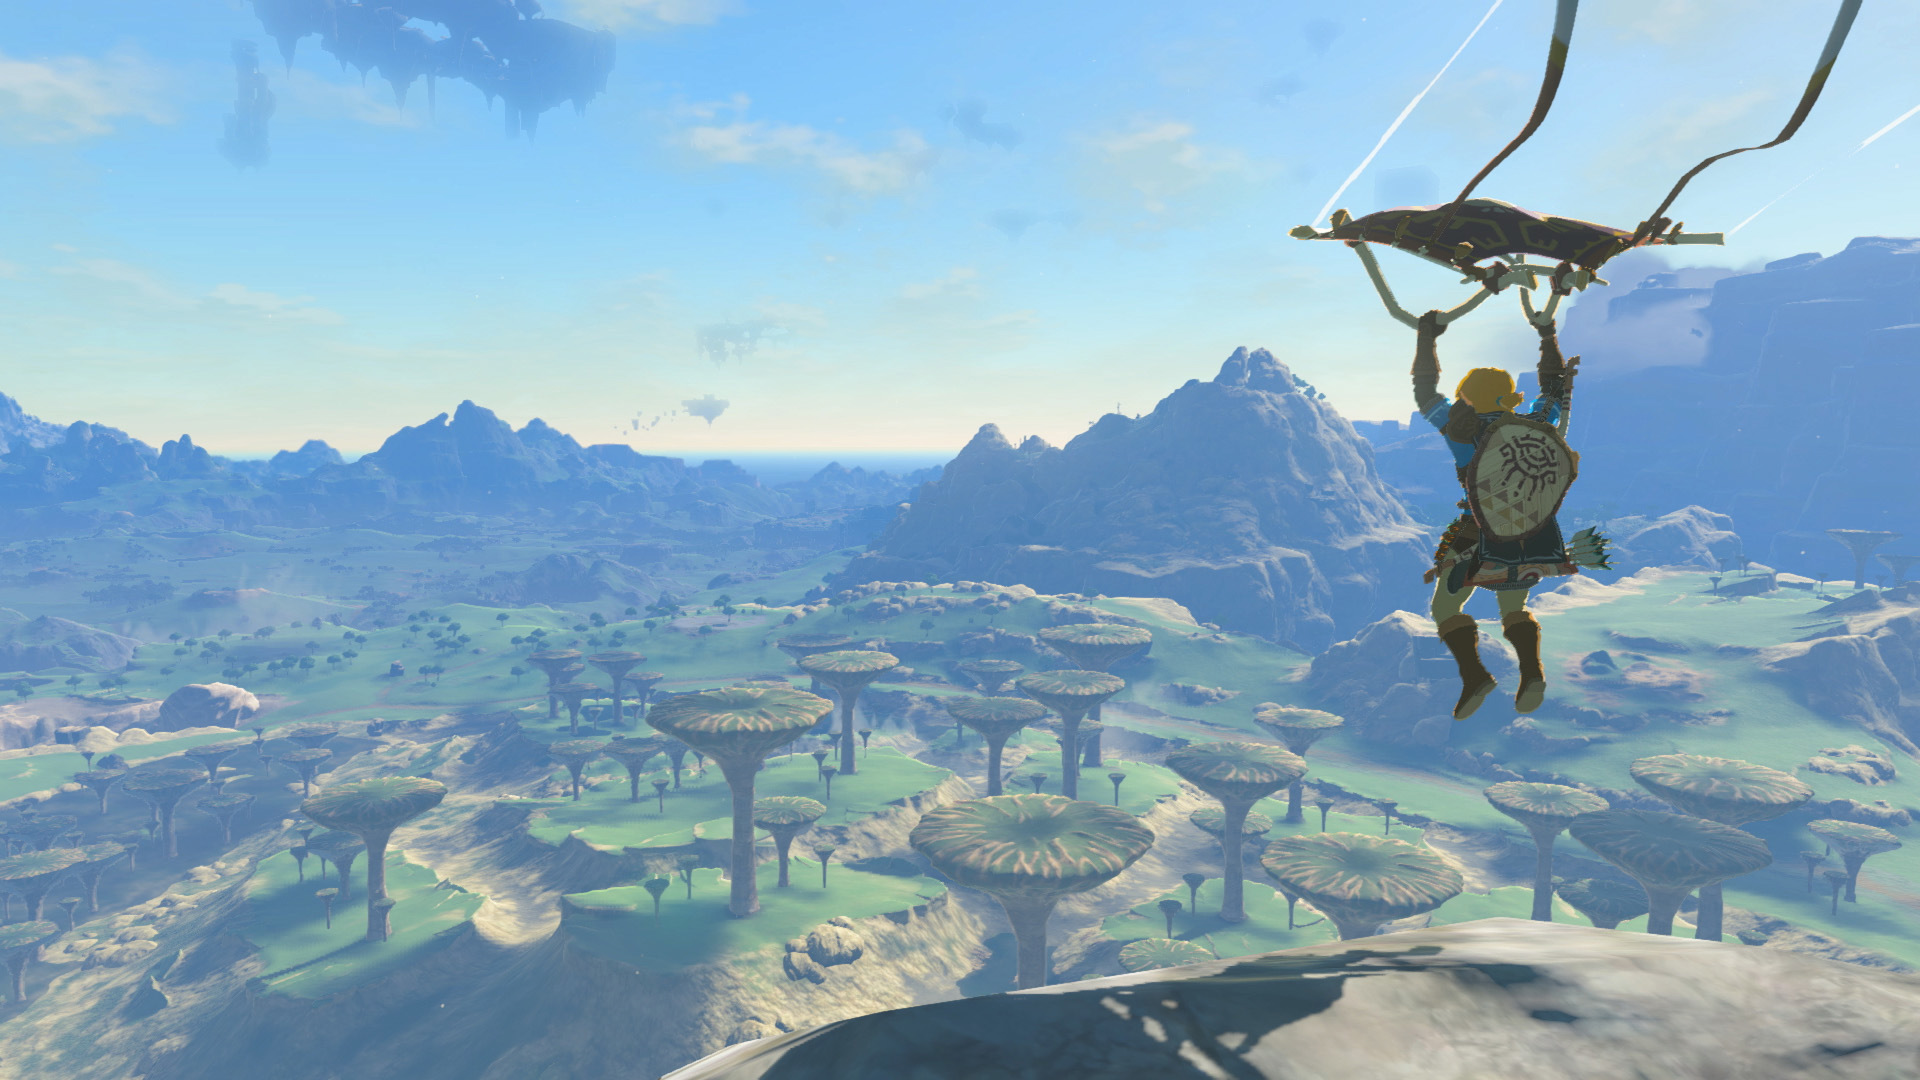 The next Zelda game will have a brand new open world Hyrule says Nintendo